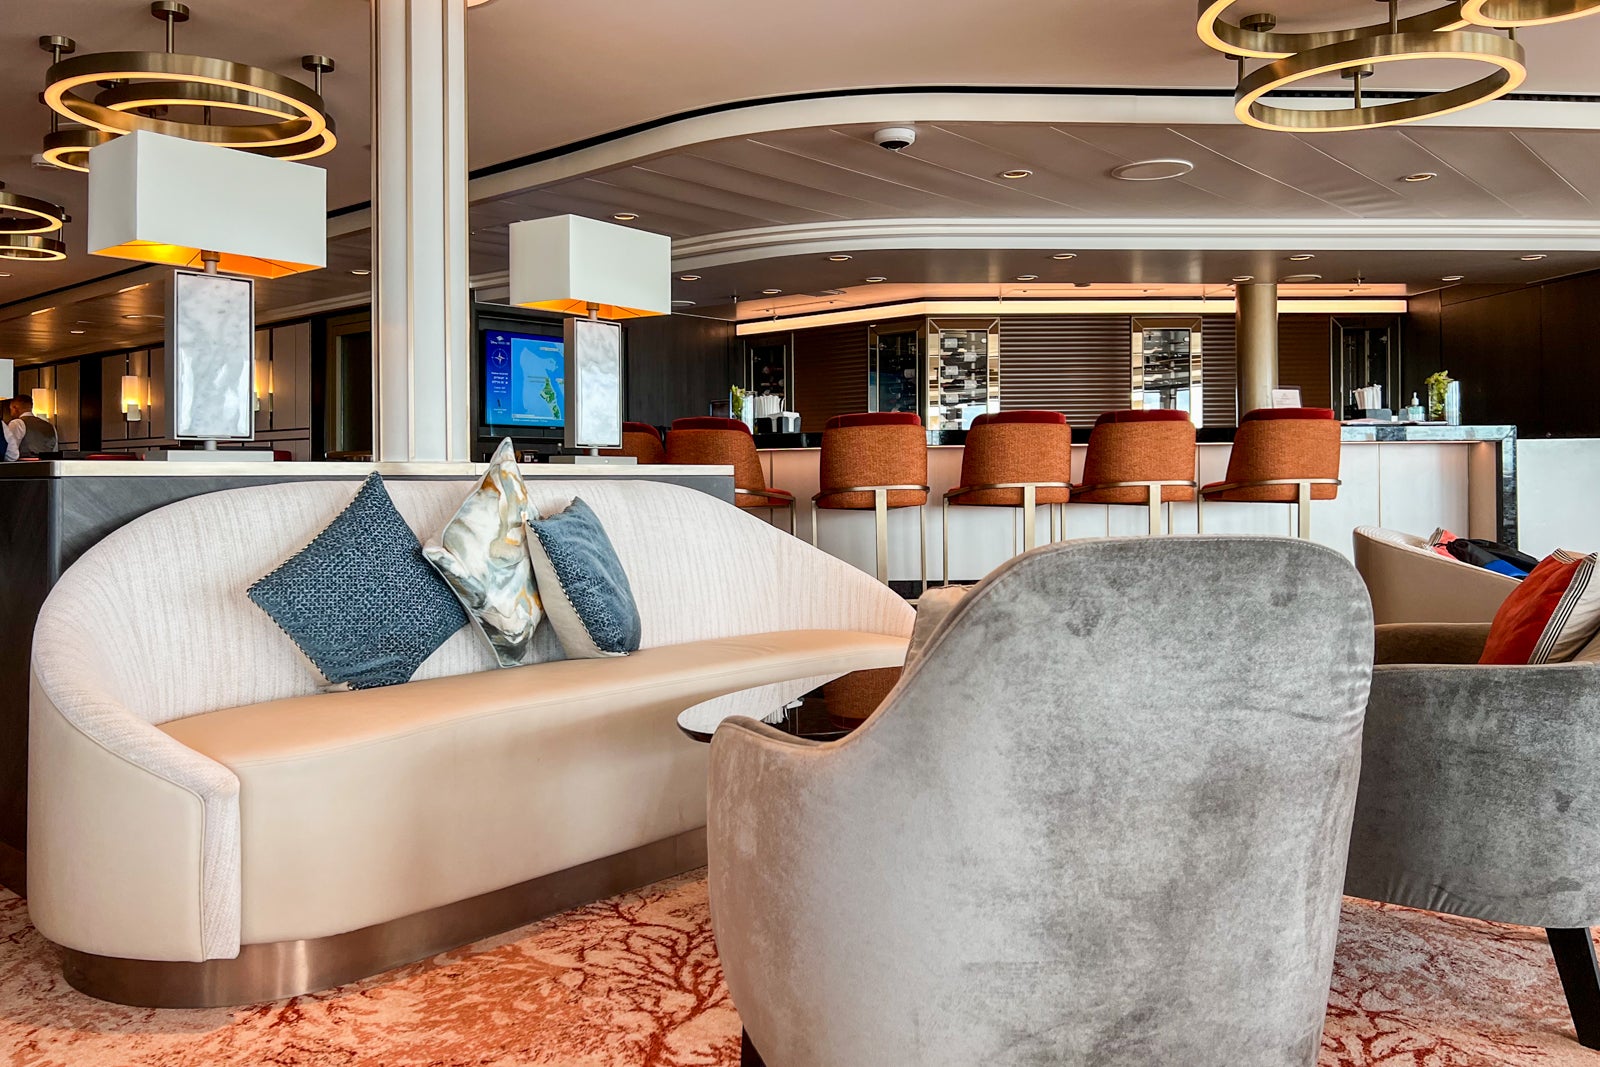 Is Disney Cruise Line concierge level worth it? We tested it to find out.